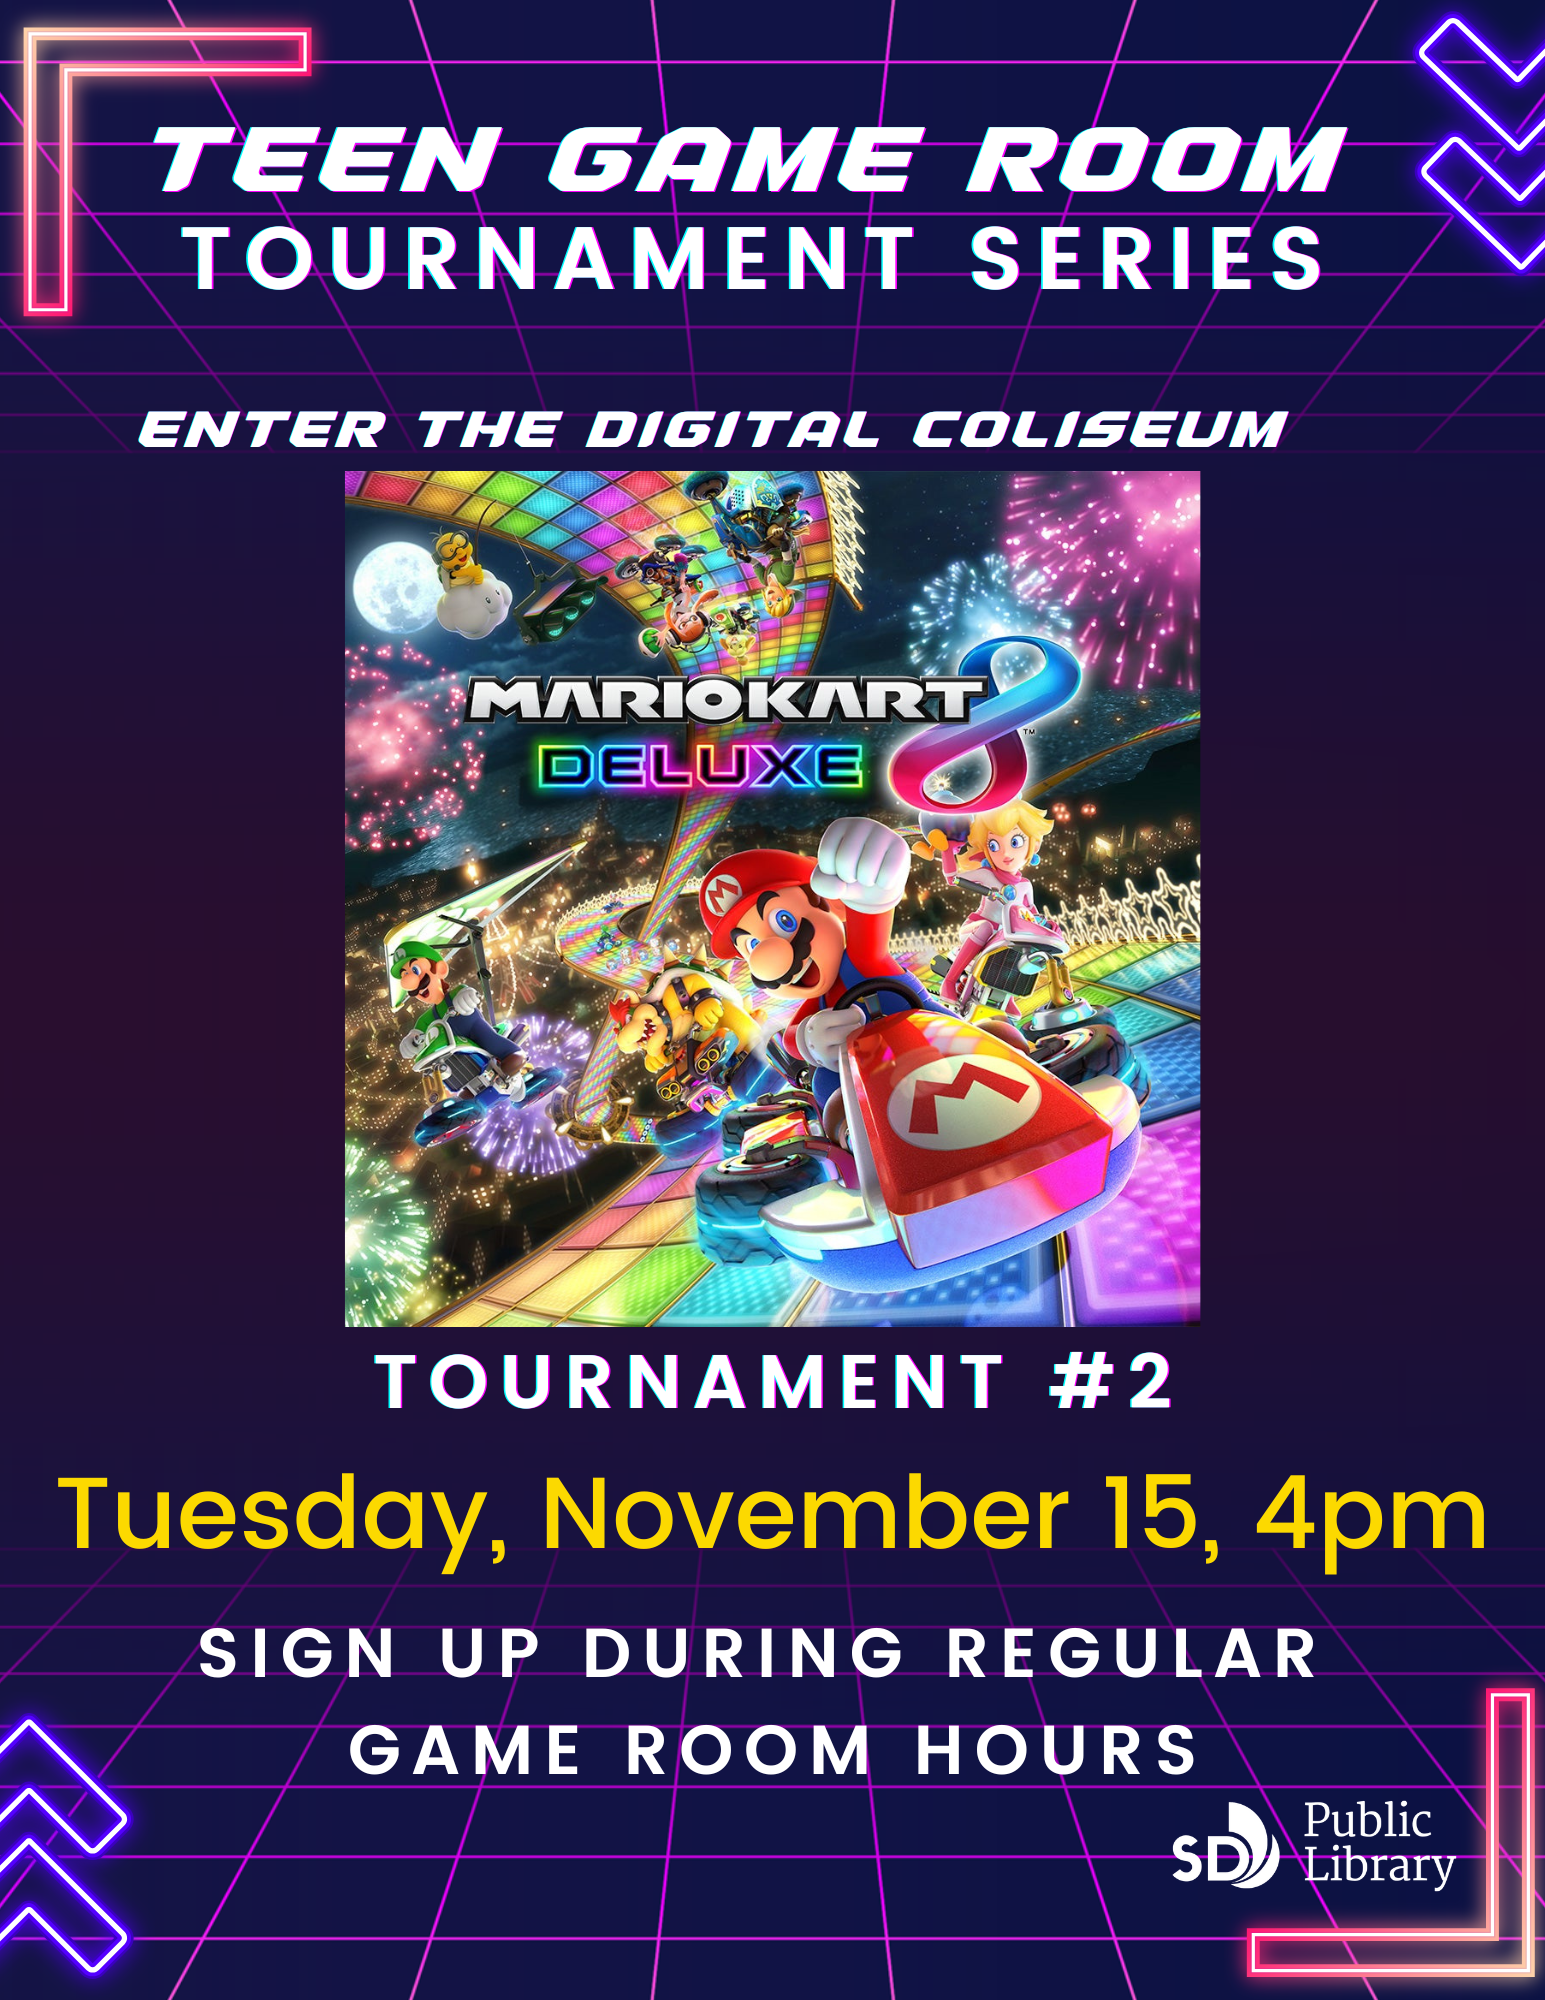 Teen Game Room Tournament Series. Enter the digital coliseum. Mario Kart 8 Deluxe. Tournament #2. Tuesday, November 15, 4PM. Sign up during regular game room hours. 